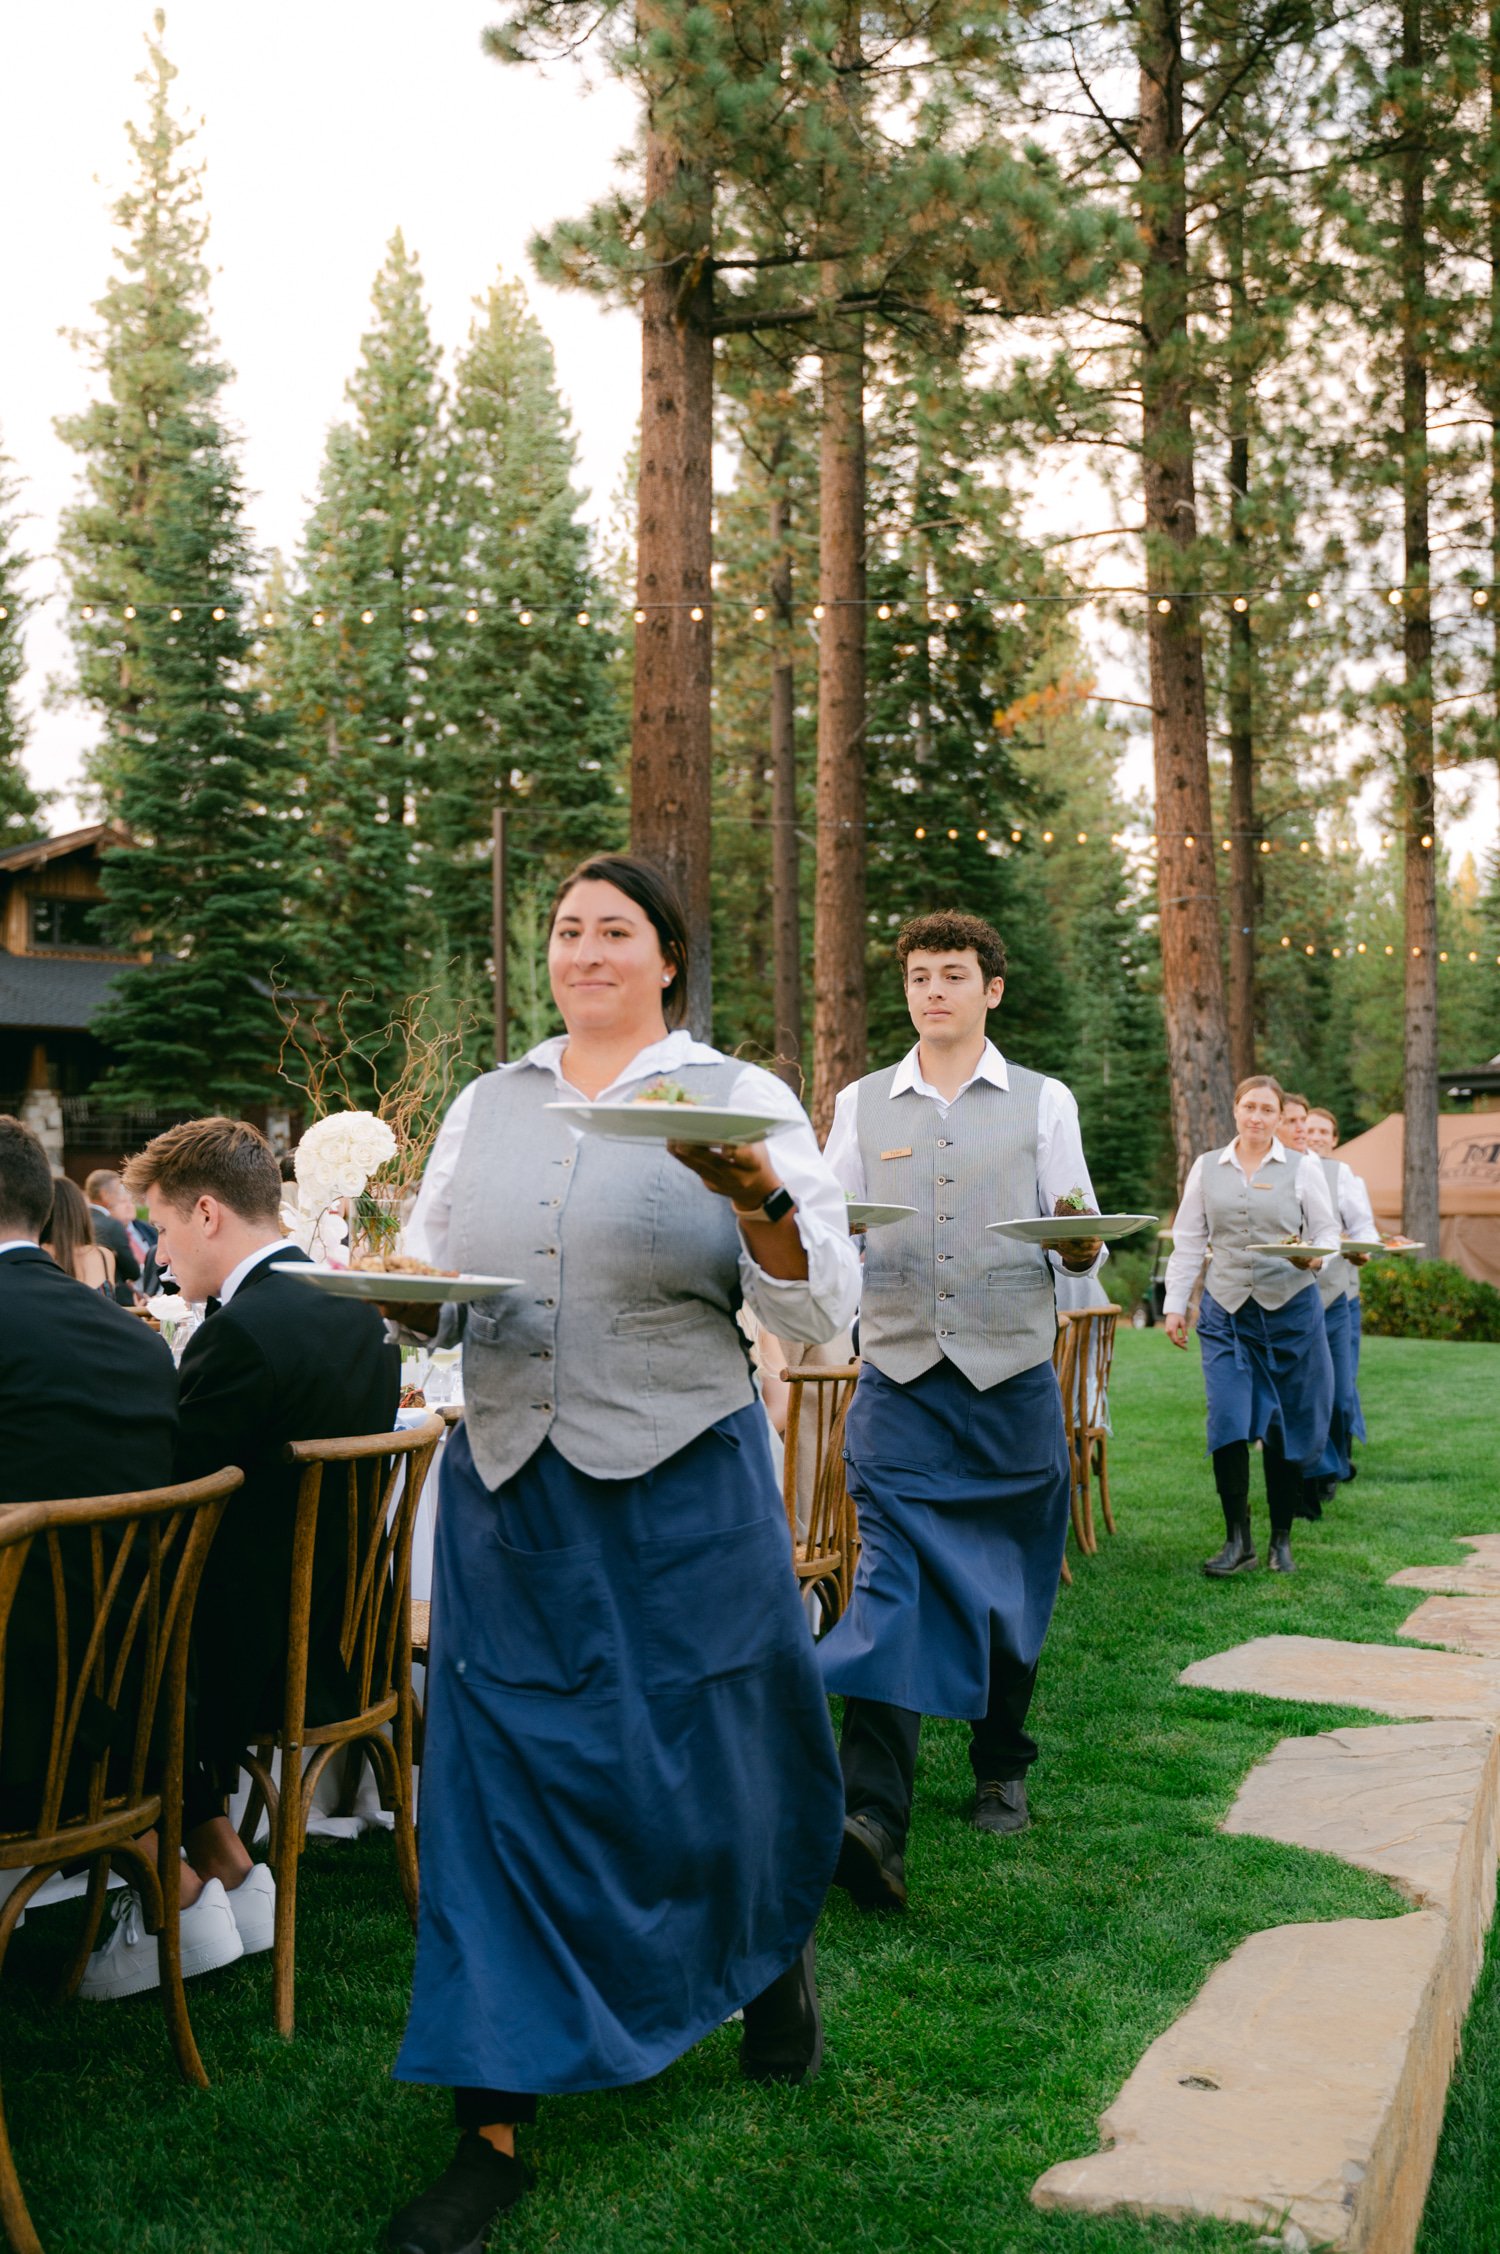 Martis Camp Wedding, photo of the servers serving the food during the outdoor evening reception